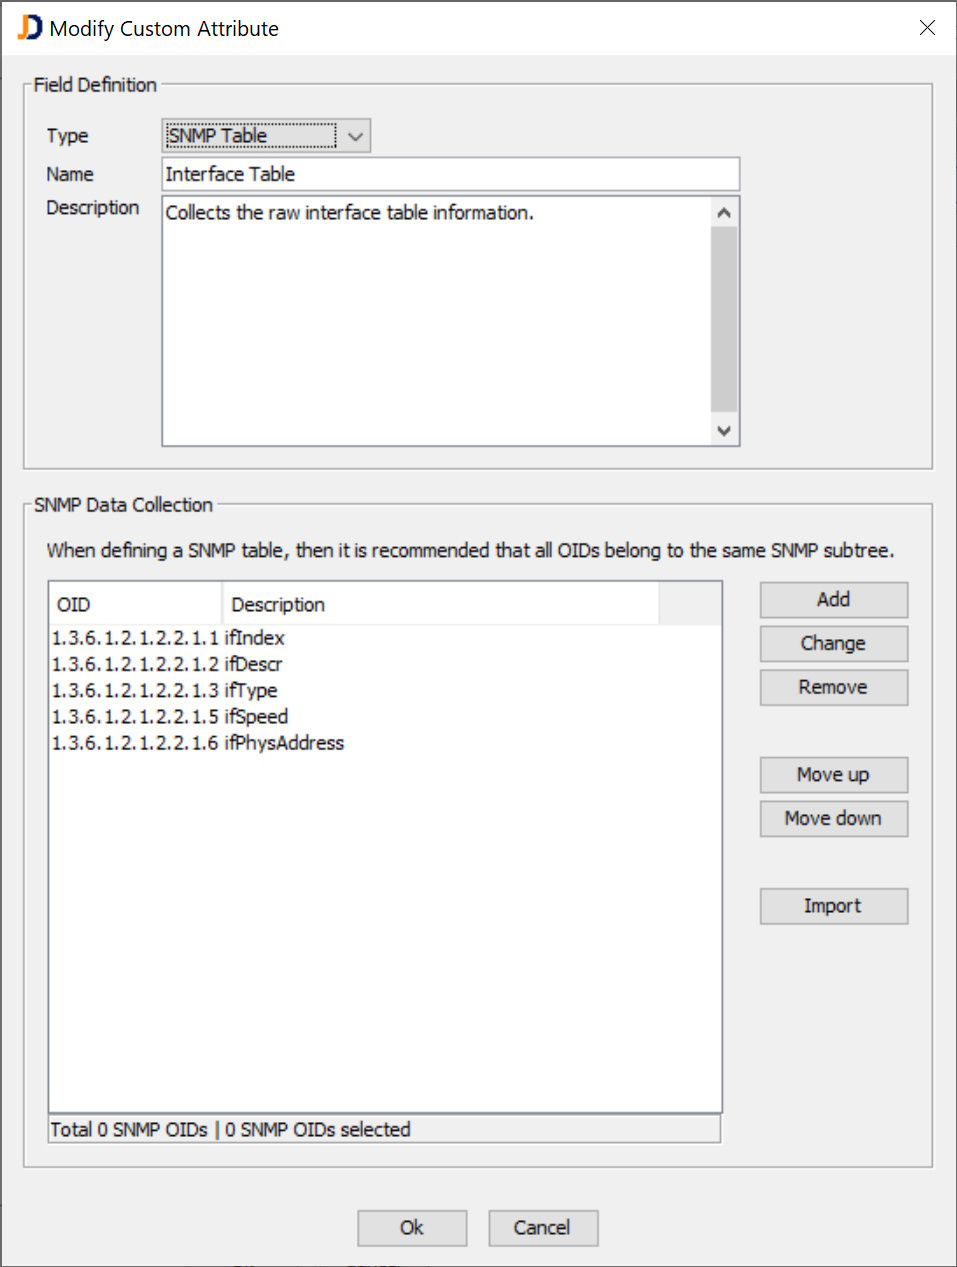 Defining the Data Collection for an SNMP Table